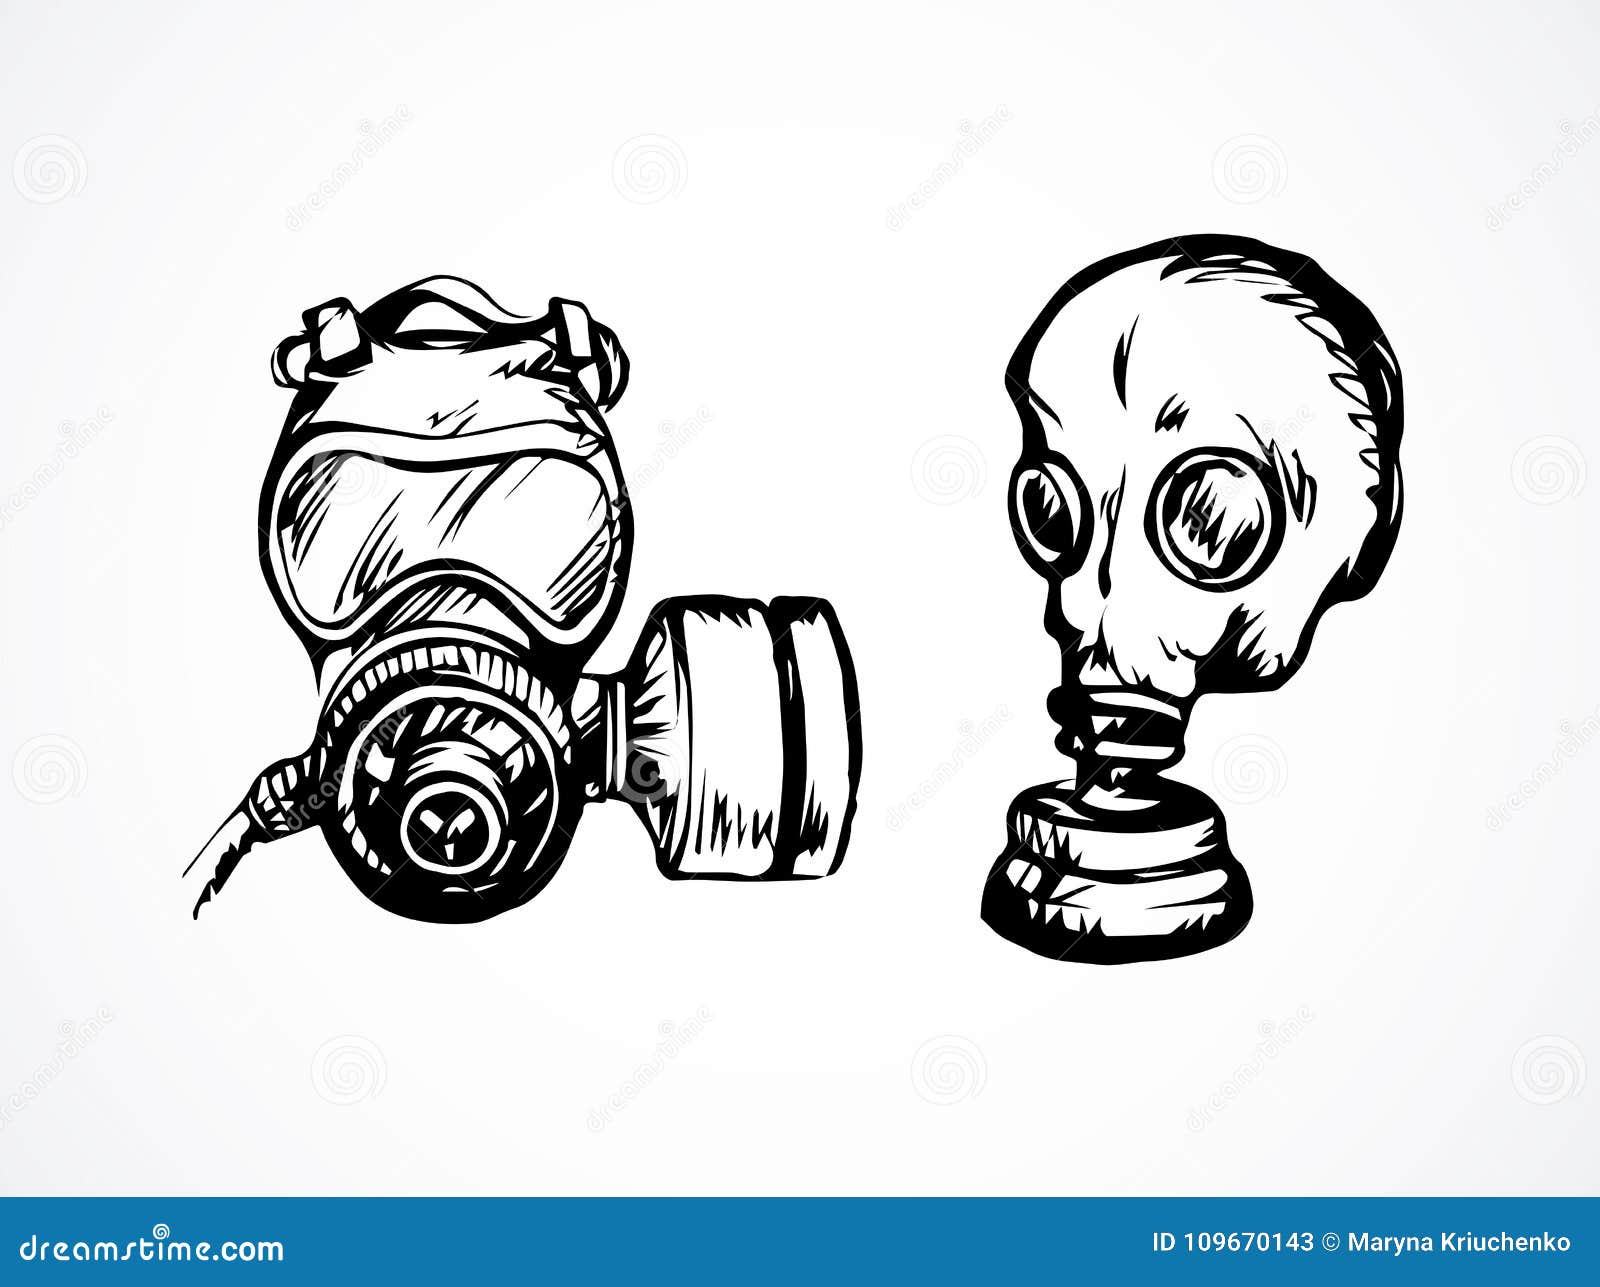 How to Draw a Gas Mask  Easy Drawing Tutorial For Kids